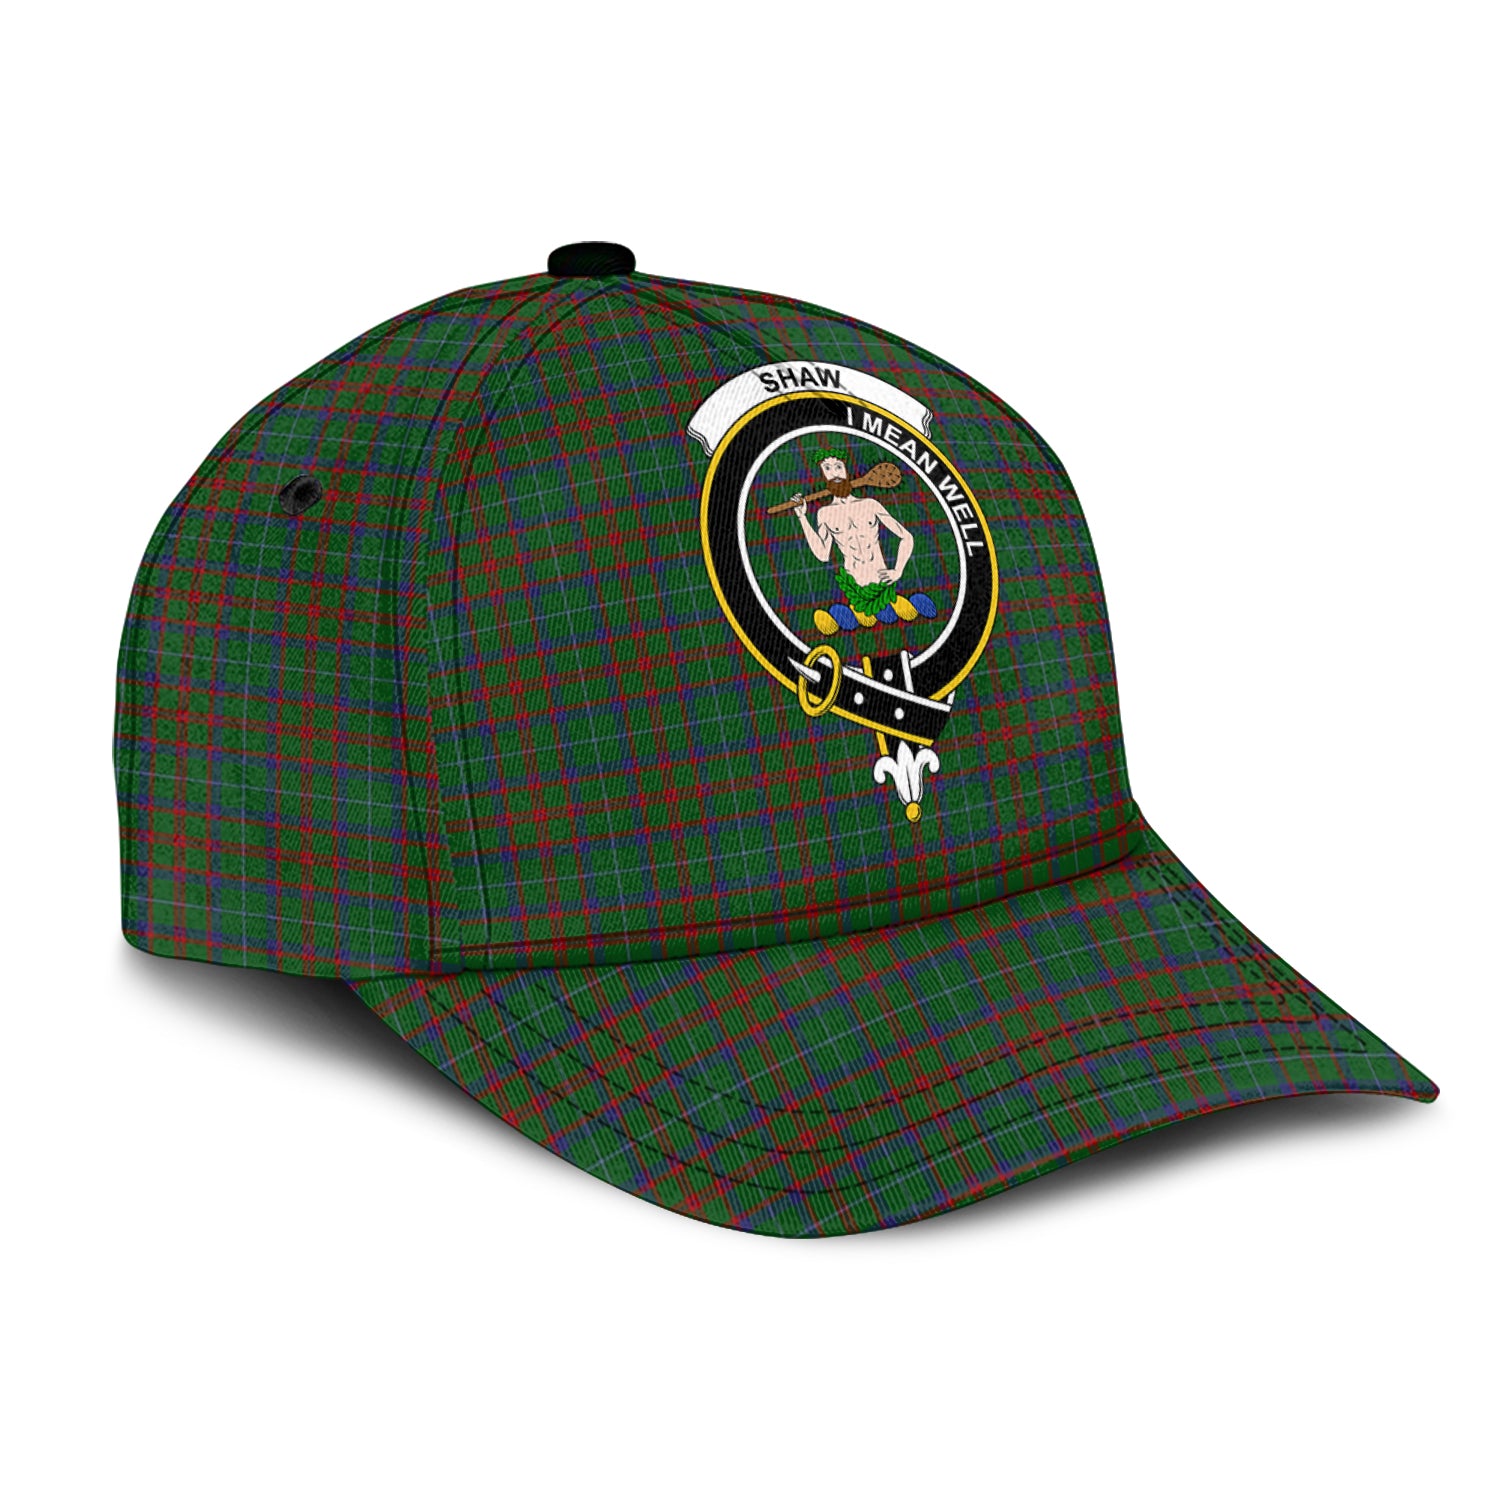 shaw-of-tordarroch-green-hunting-tartan-classic-cap-with-family-crest